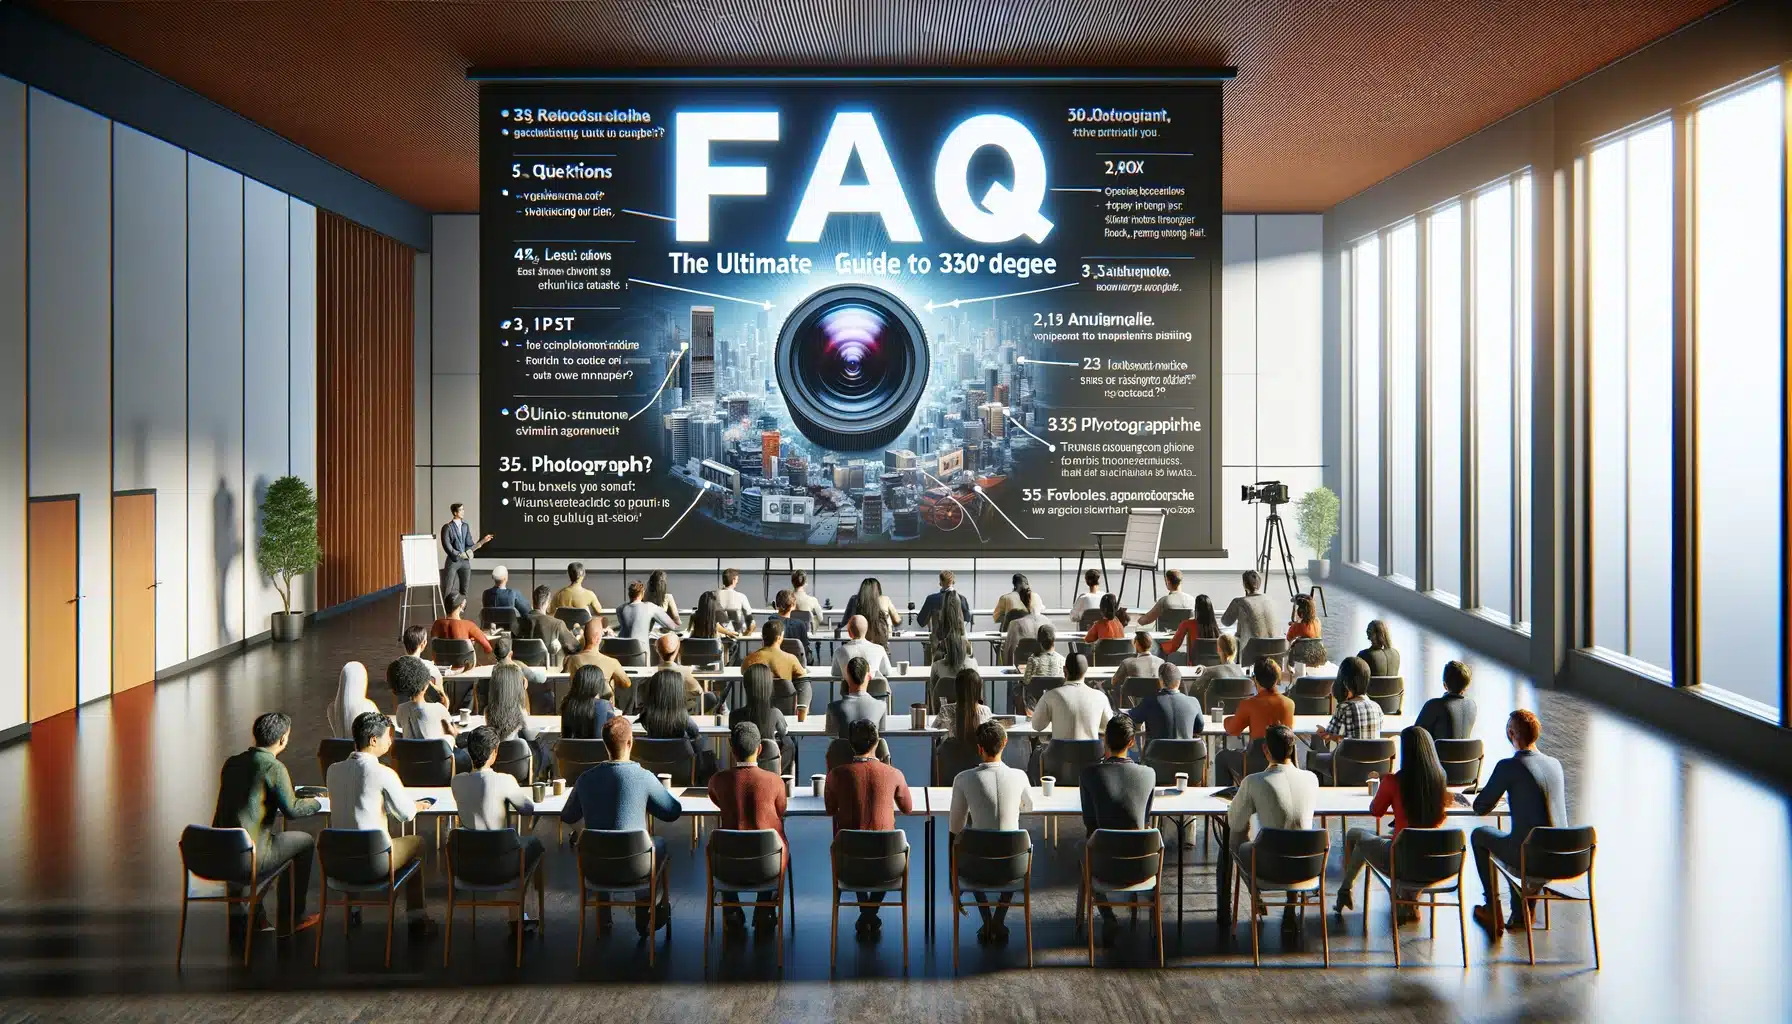 A seminar room with a diverse audience looking at a screen displaying FAQs about portrait, highlighting an educational and engaging environment.